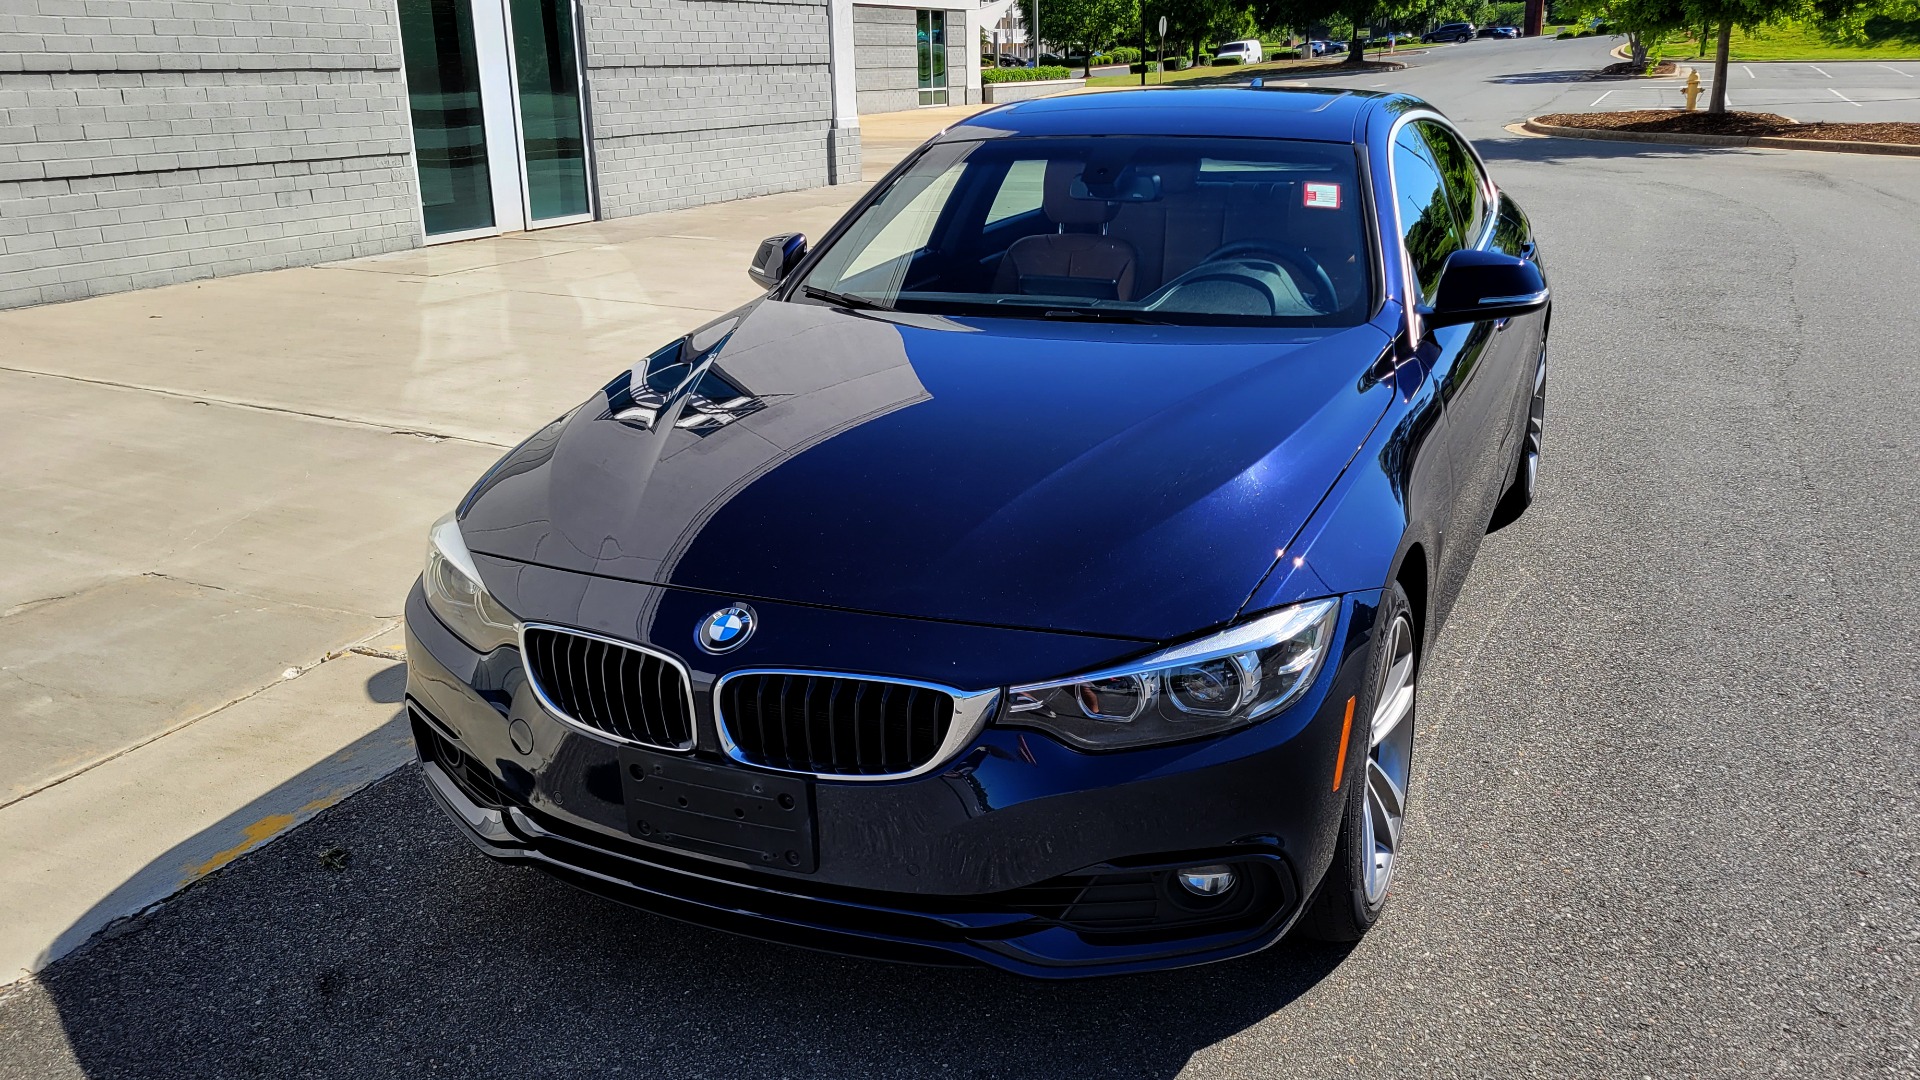 Used 2019 BMW 4 SERIES 440I XDRIVE GRAN COUPE / 3.0L / CONV PKG / HTD STS / REARVIEW for sale $40,995 at Formula Imports in Charlotte NC 28227 2